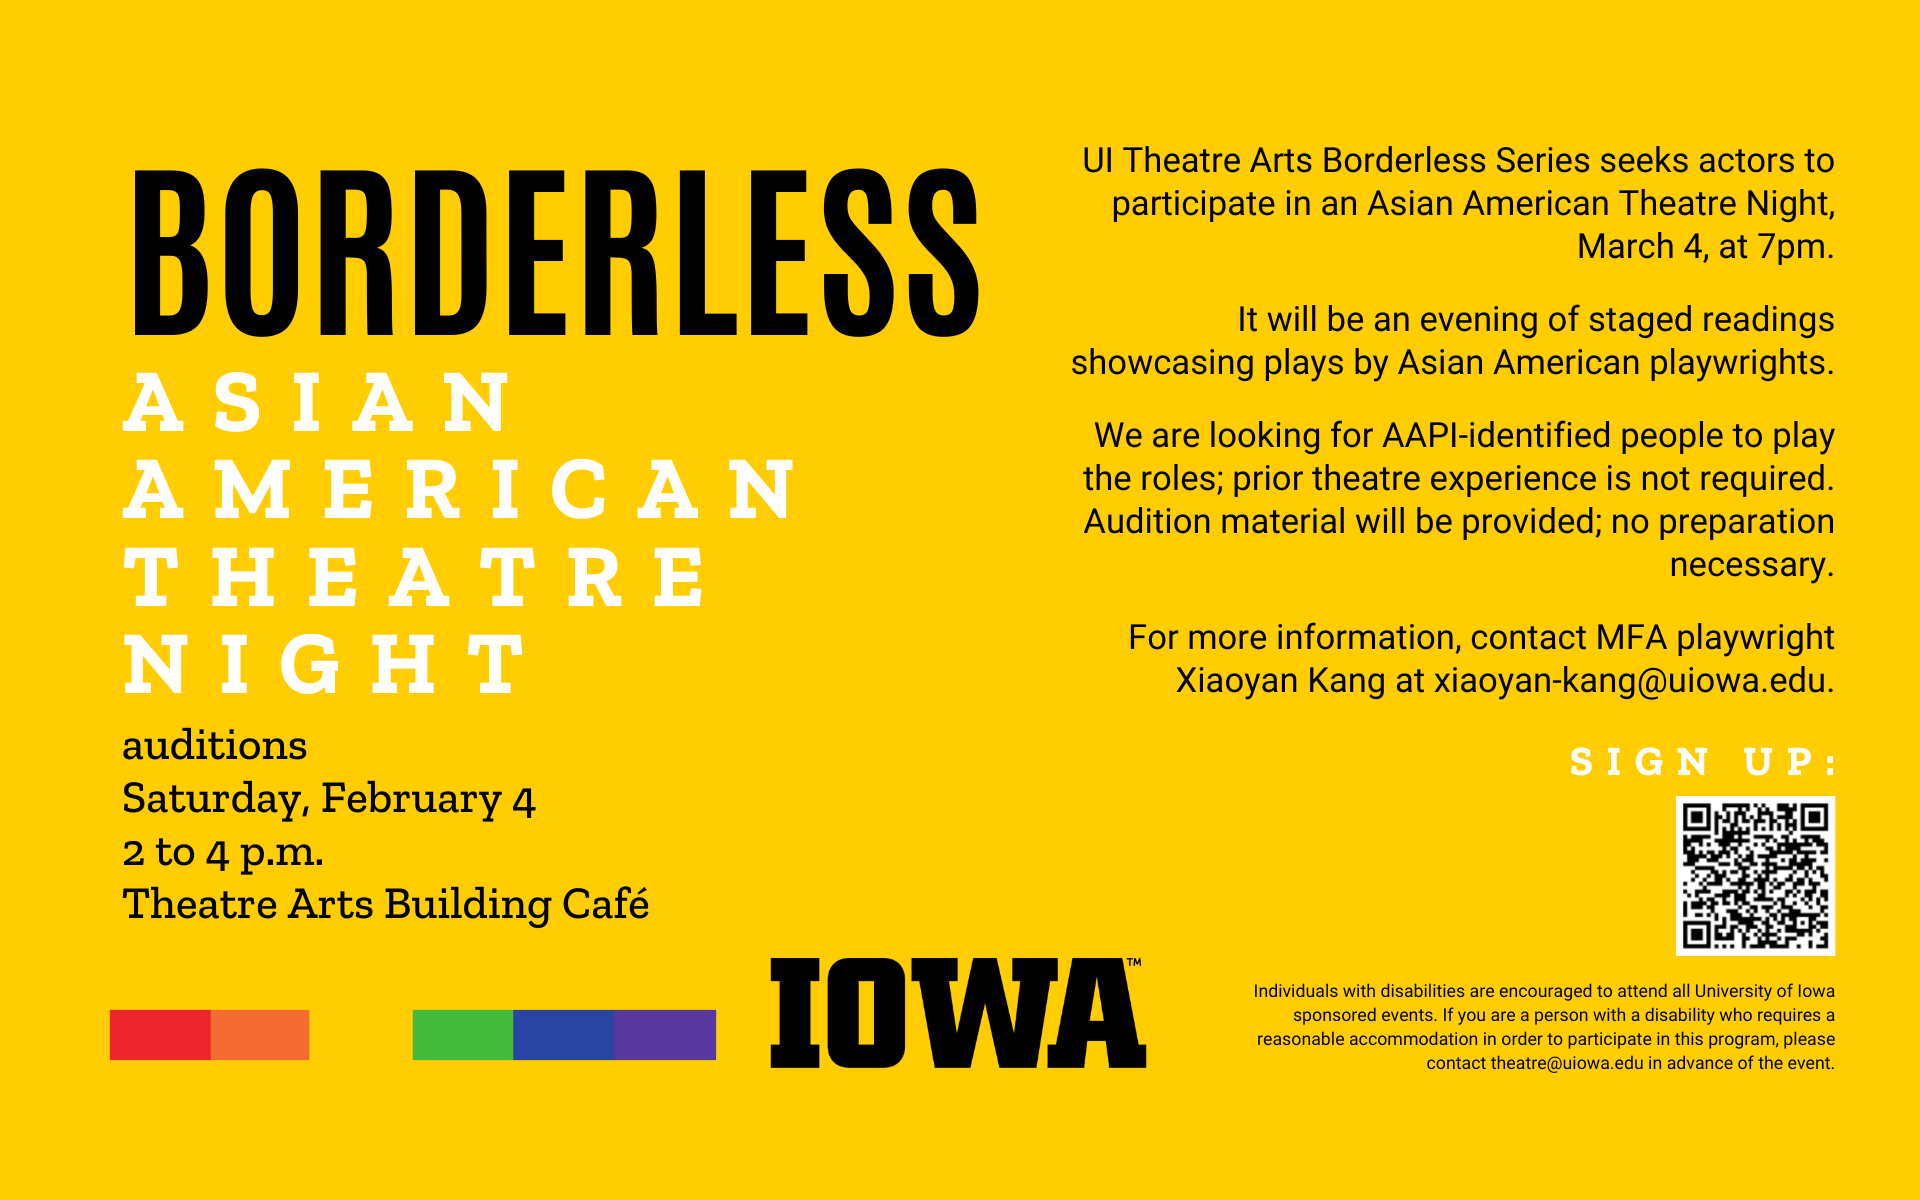 Asian American Theatre Night auditions February 4